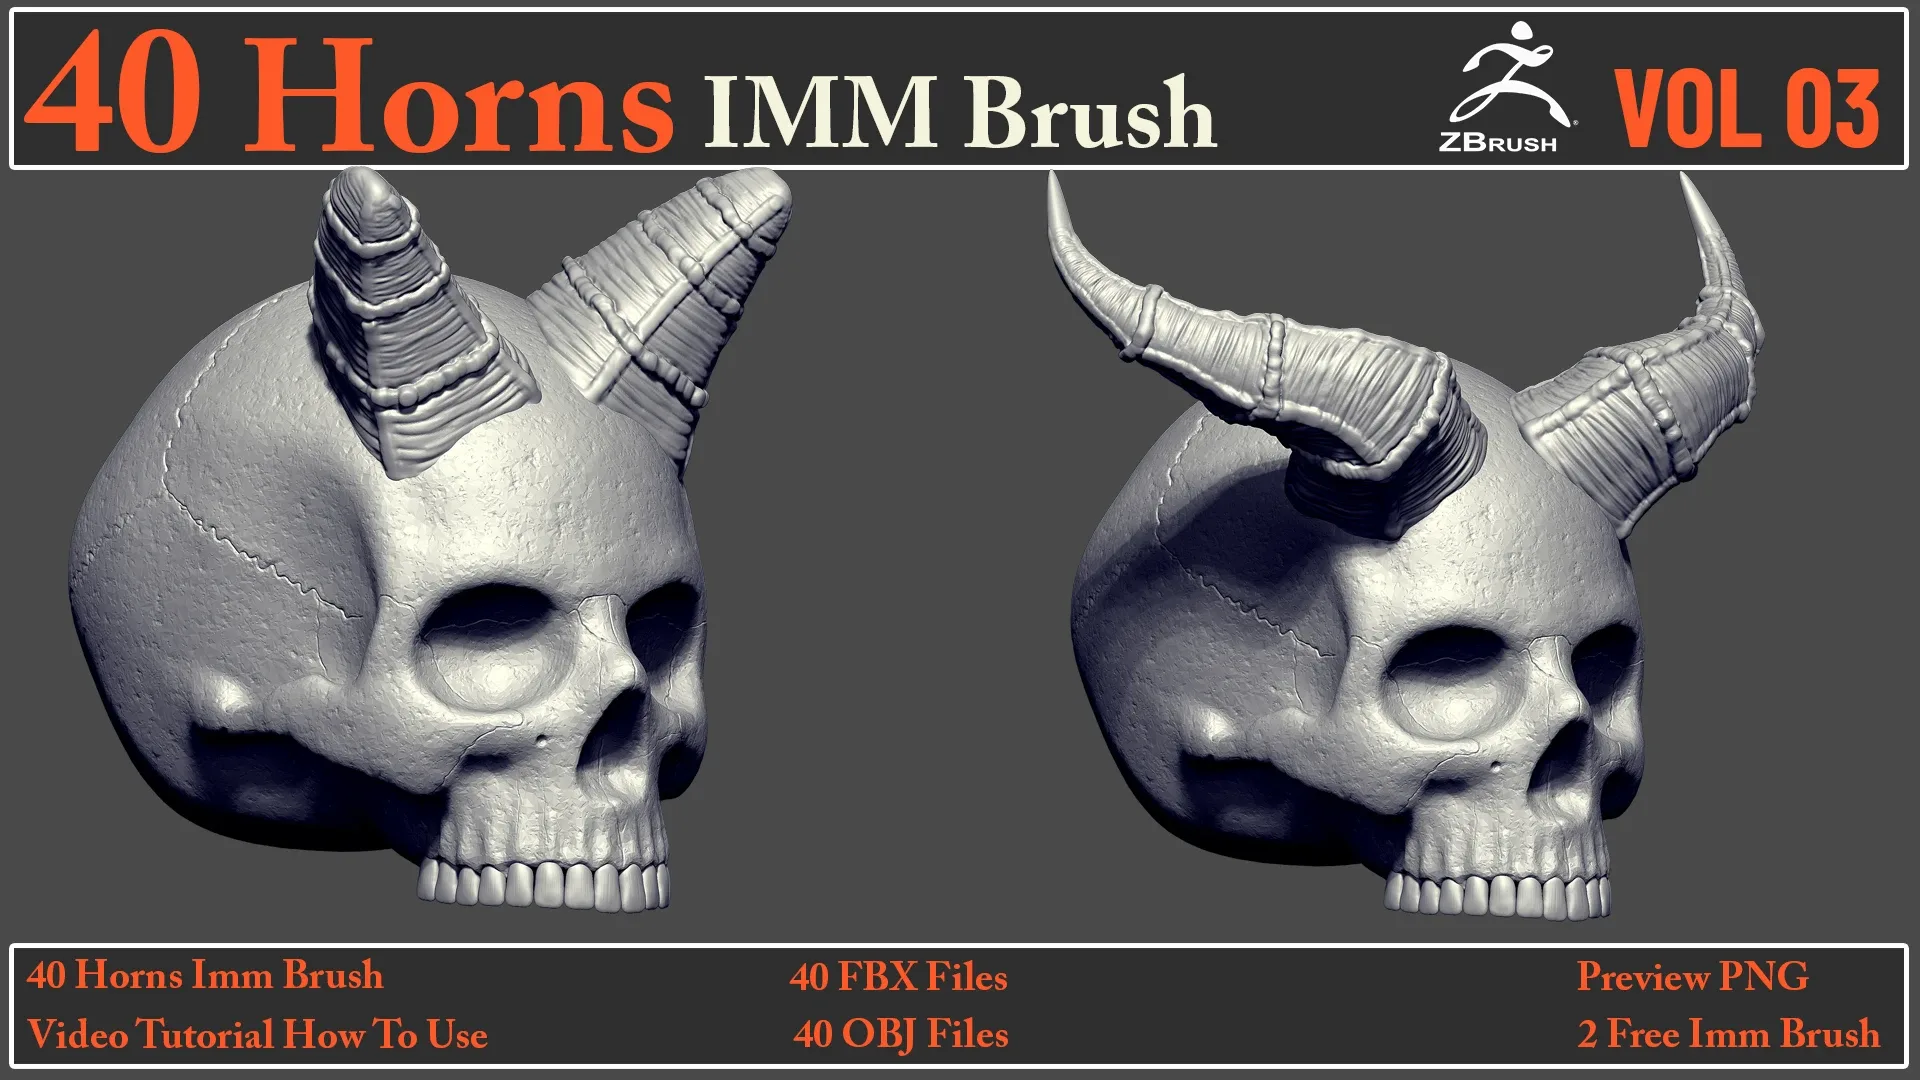 40 Horns IMM Brush VOL 03 + 40 FBX & OBJ Files + Video How To Use